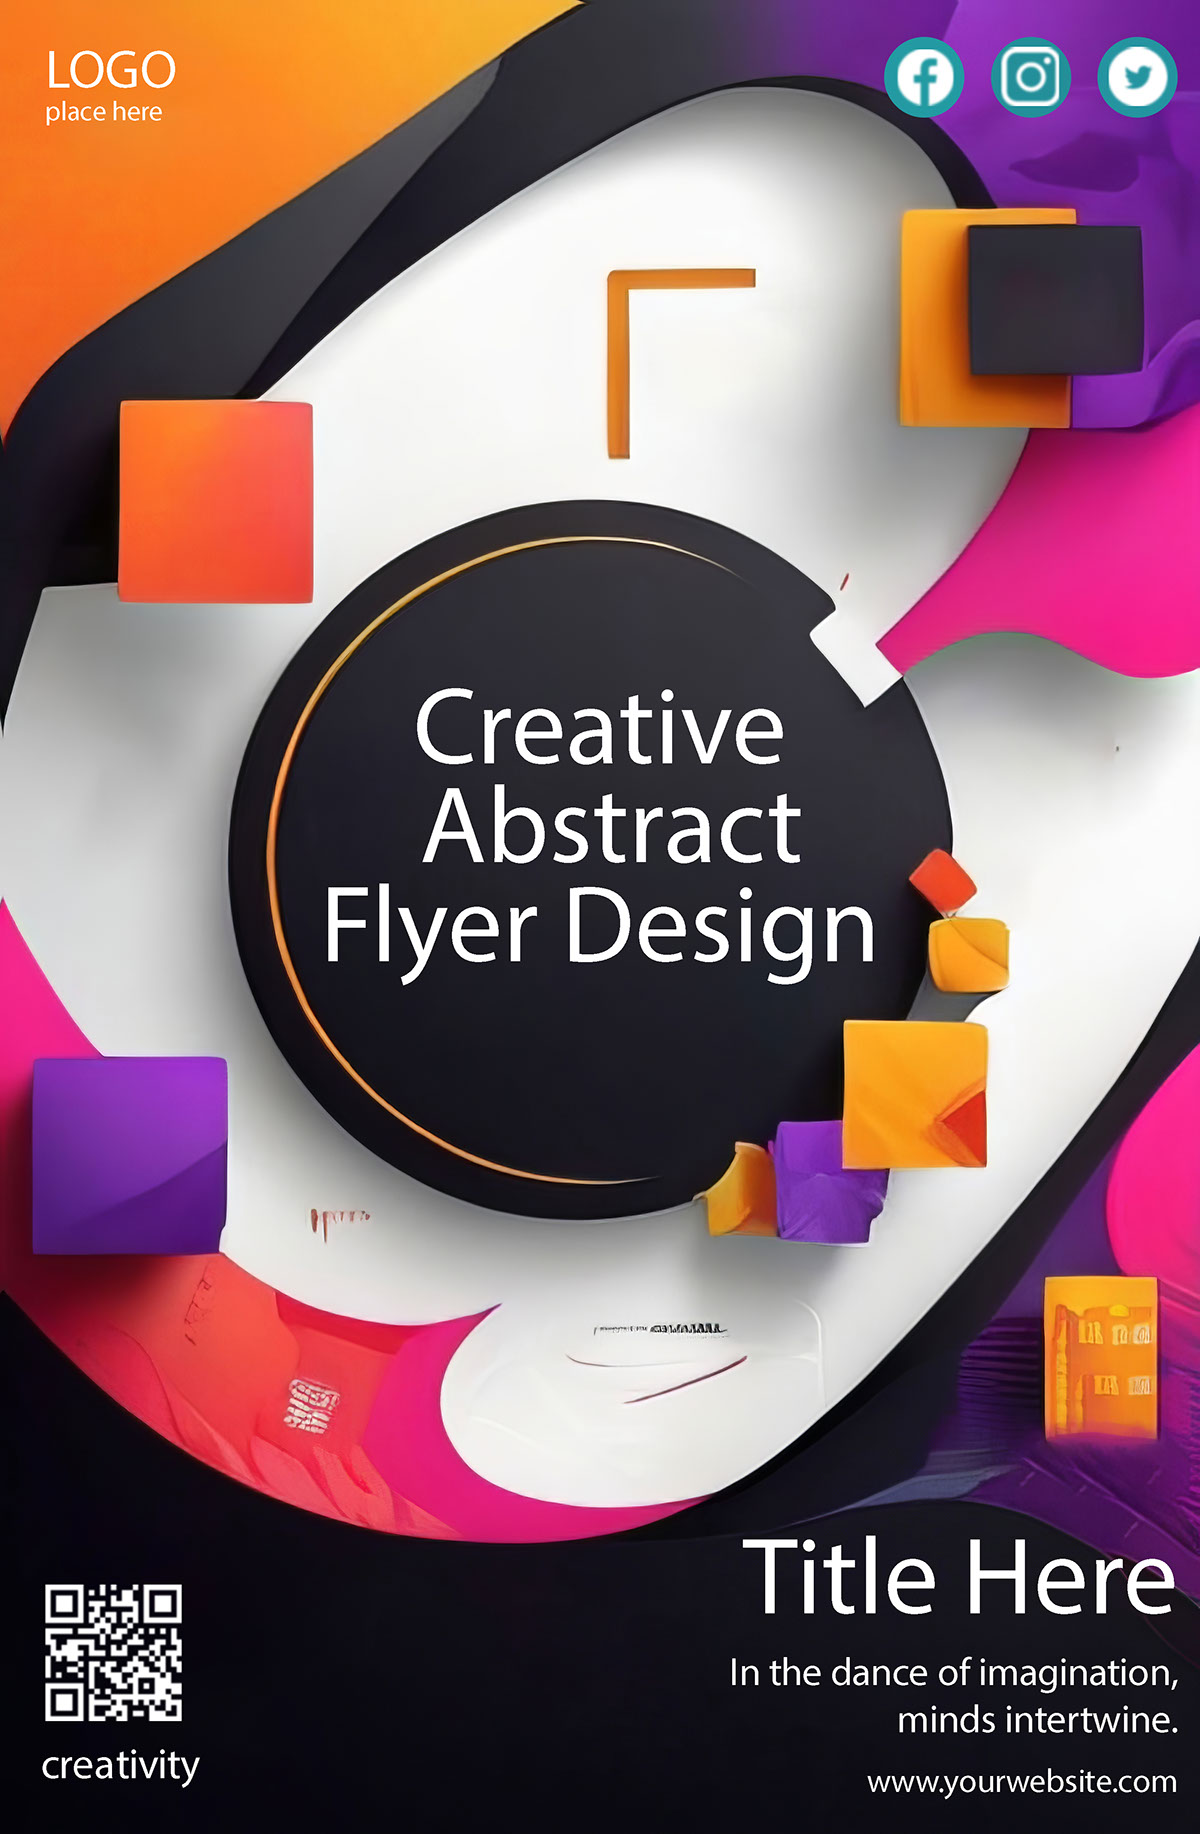 Creative Abstract Flyer Design rendition image